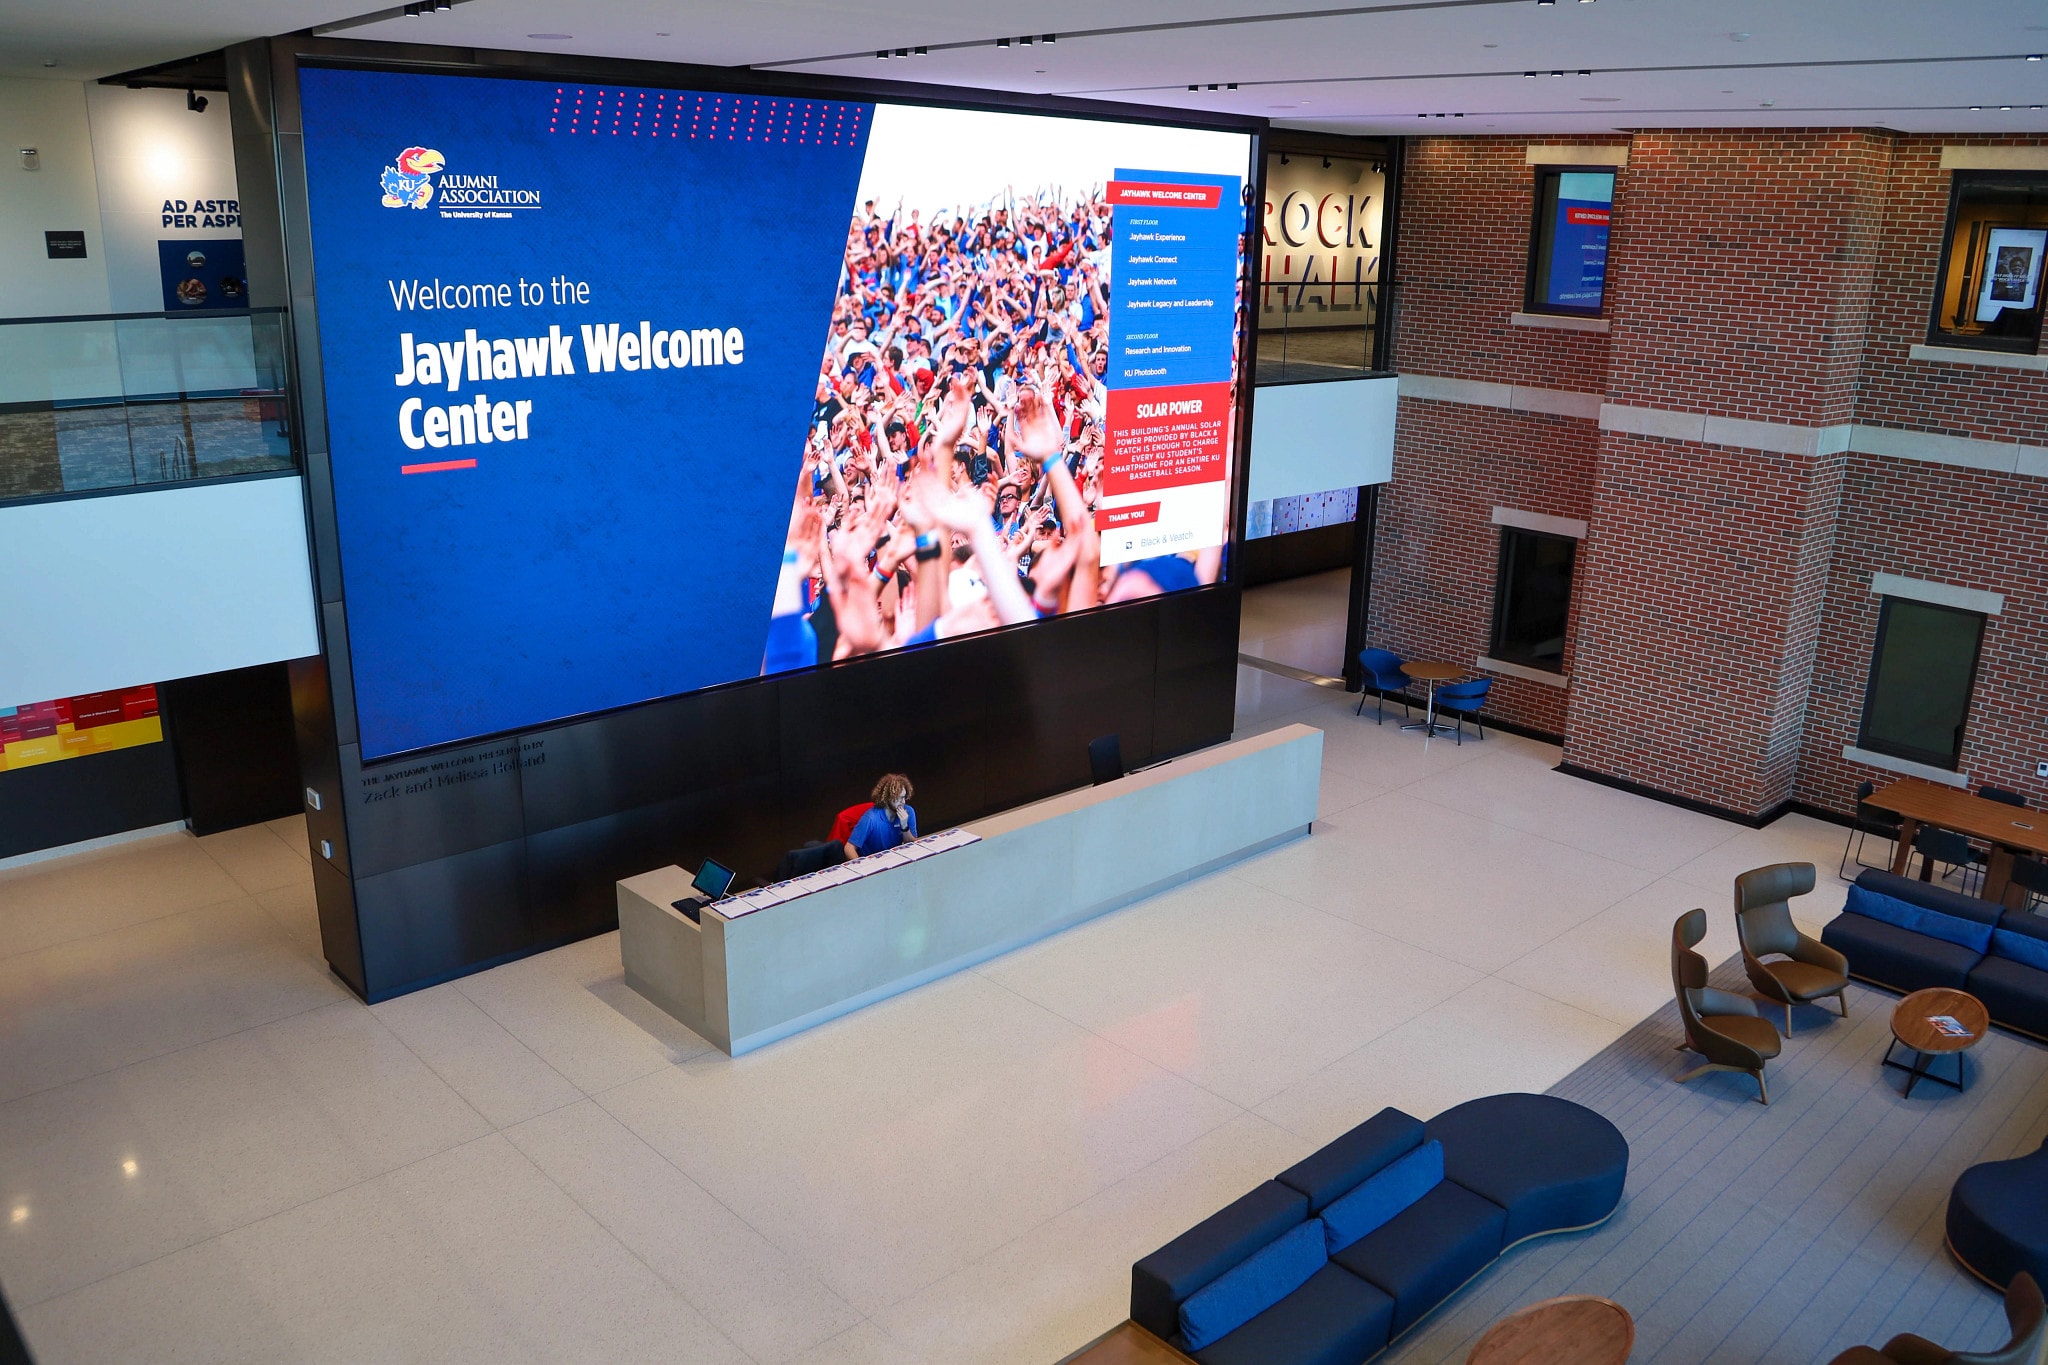 A two-story screen displays greeting messages to visitors in the lobby of the Jayhawk Welcome Center.